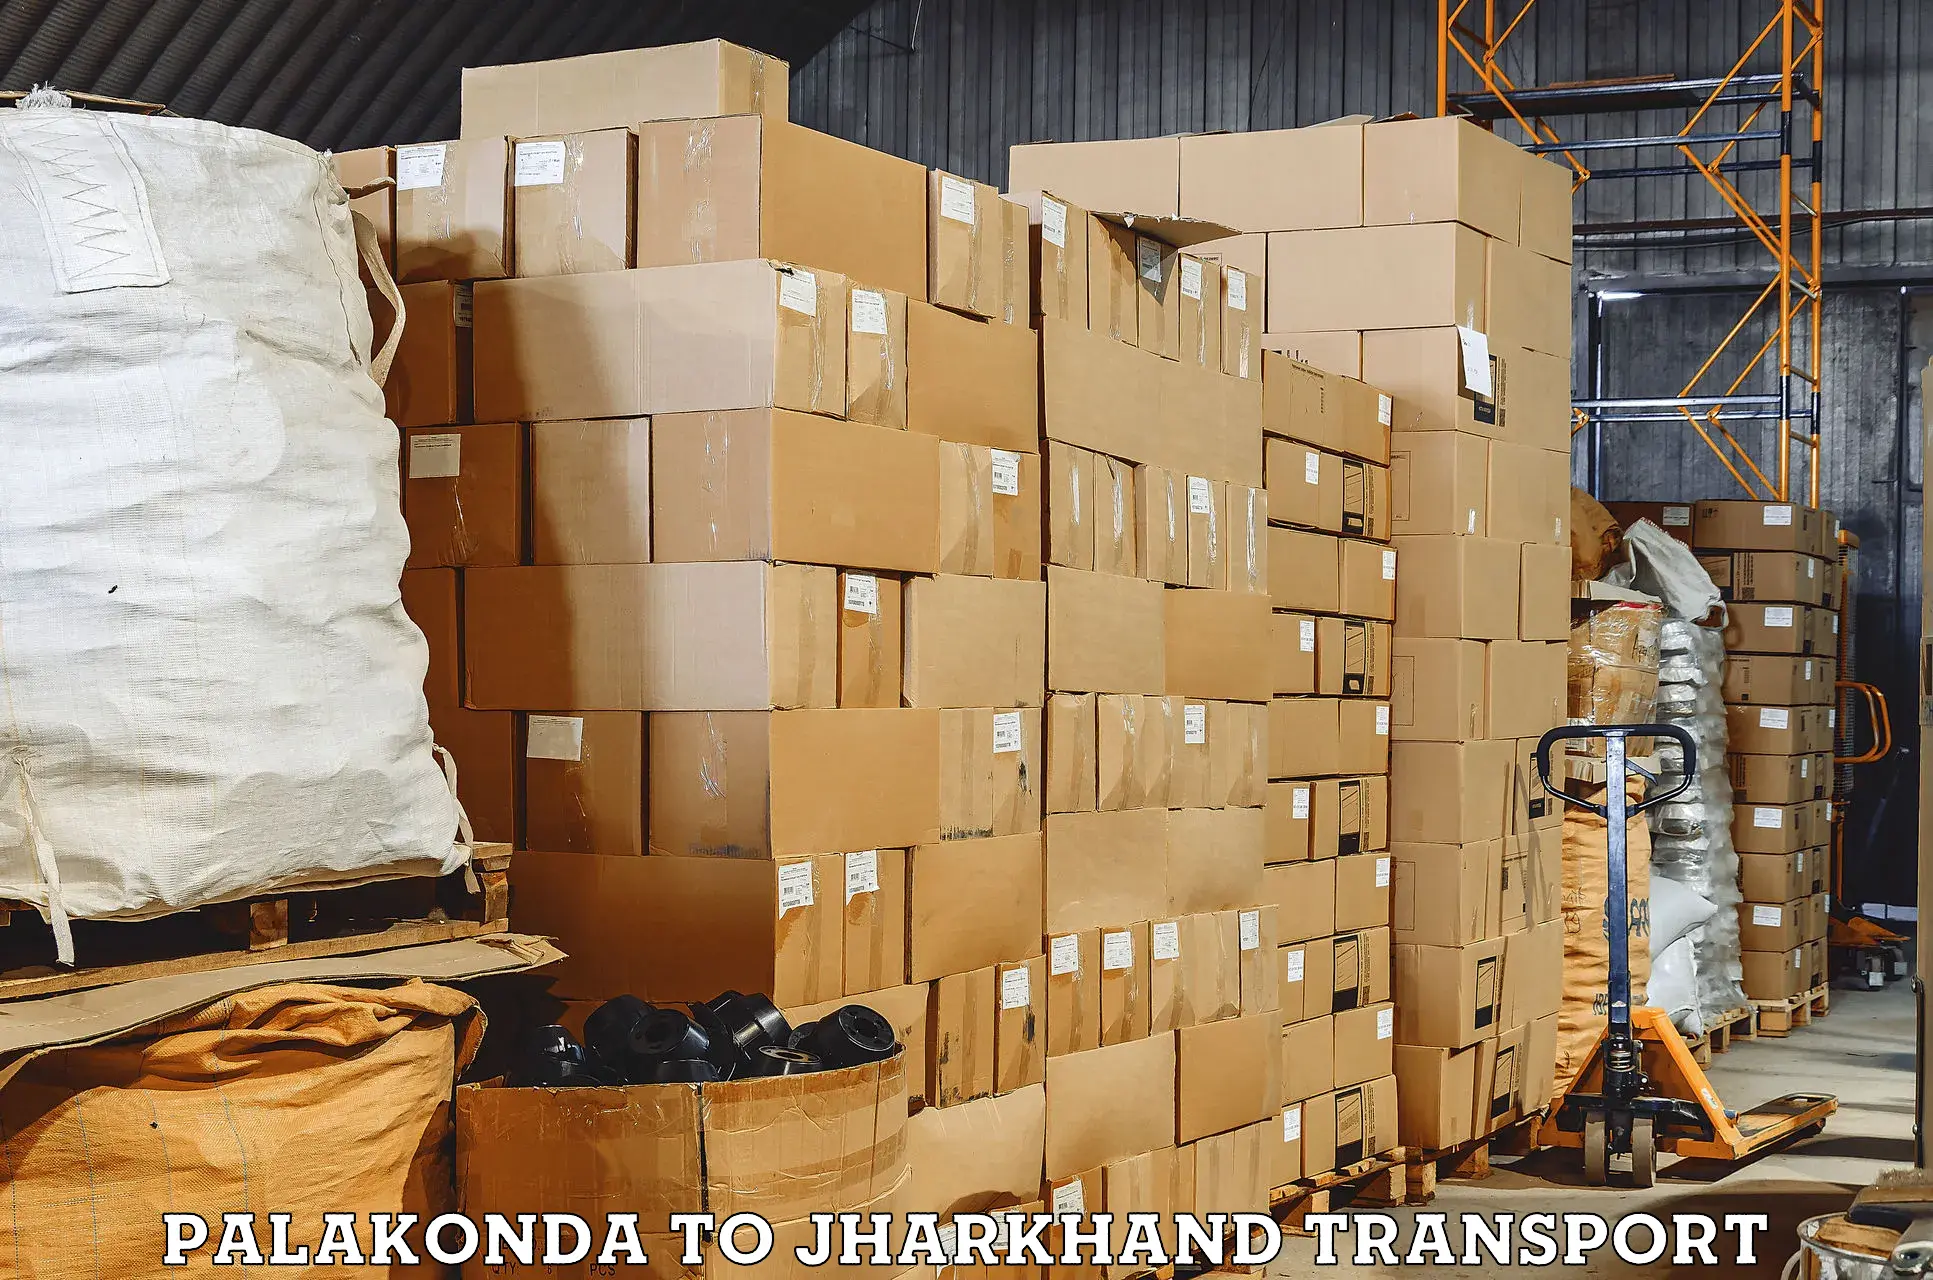 Air freight transport services in Palakonda to Bokaro Steel City